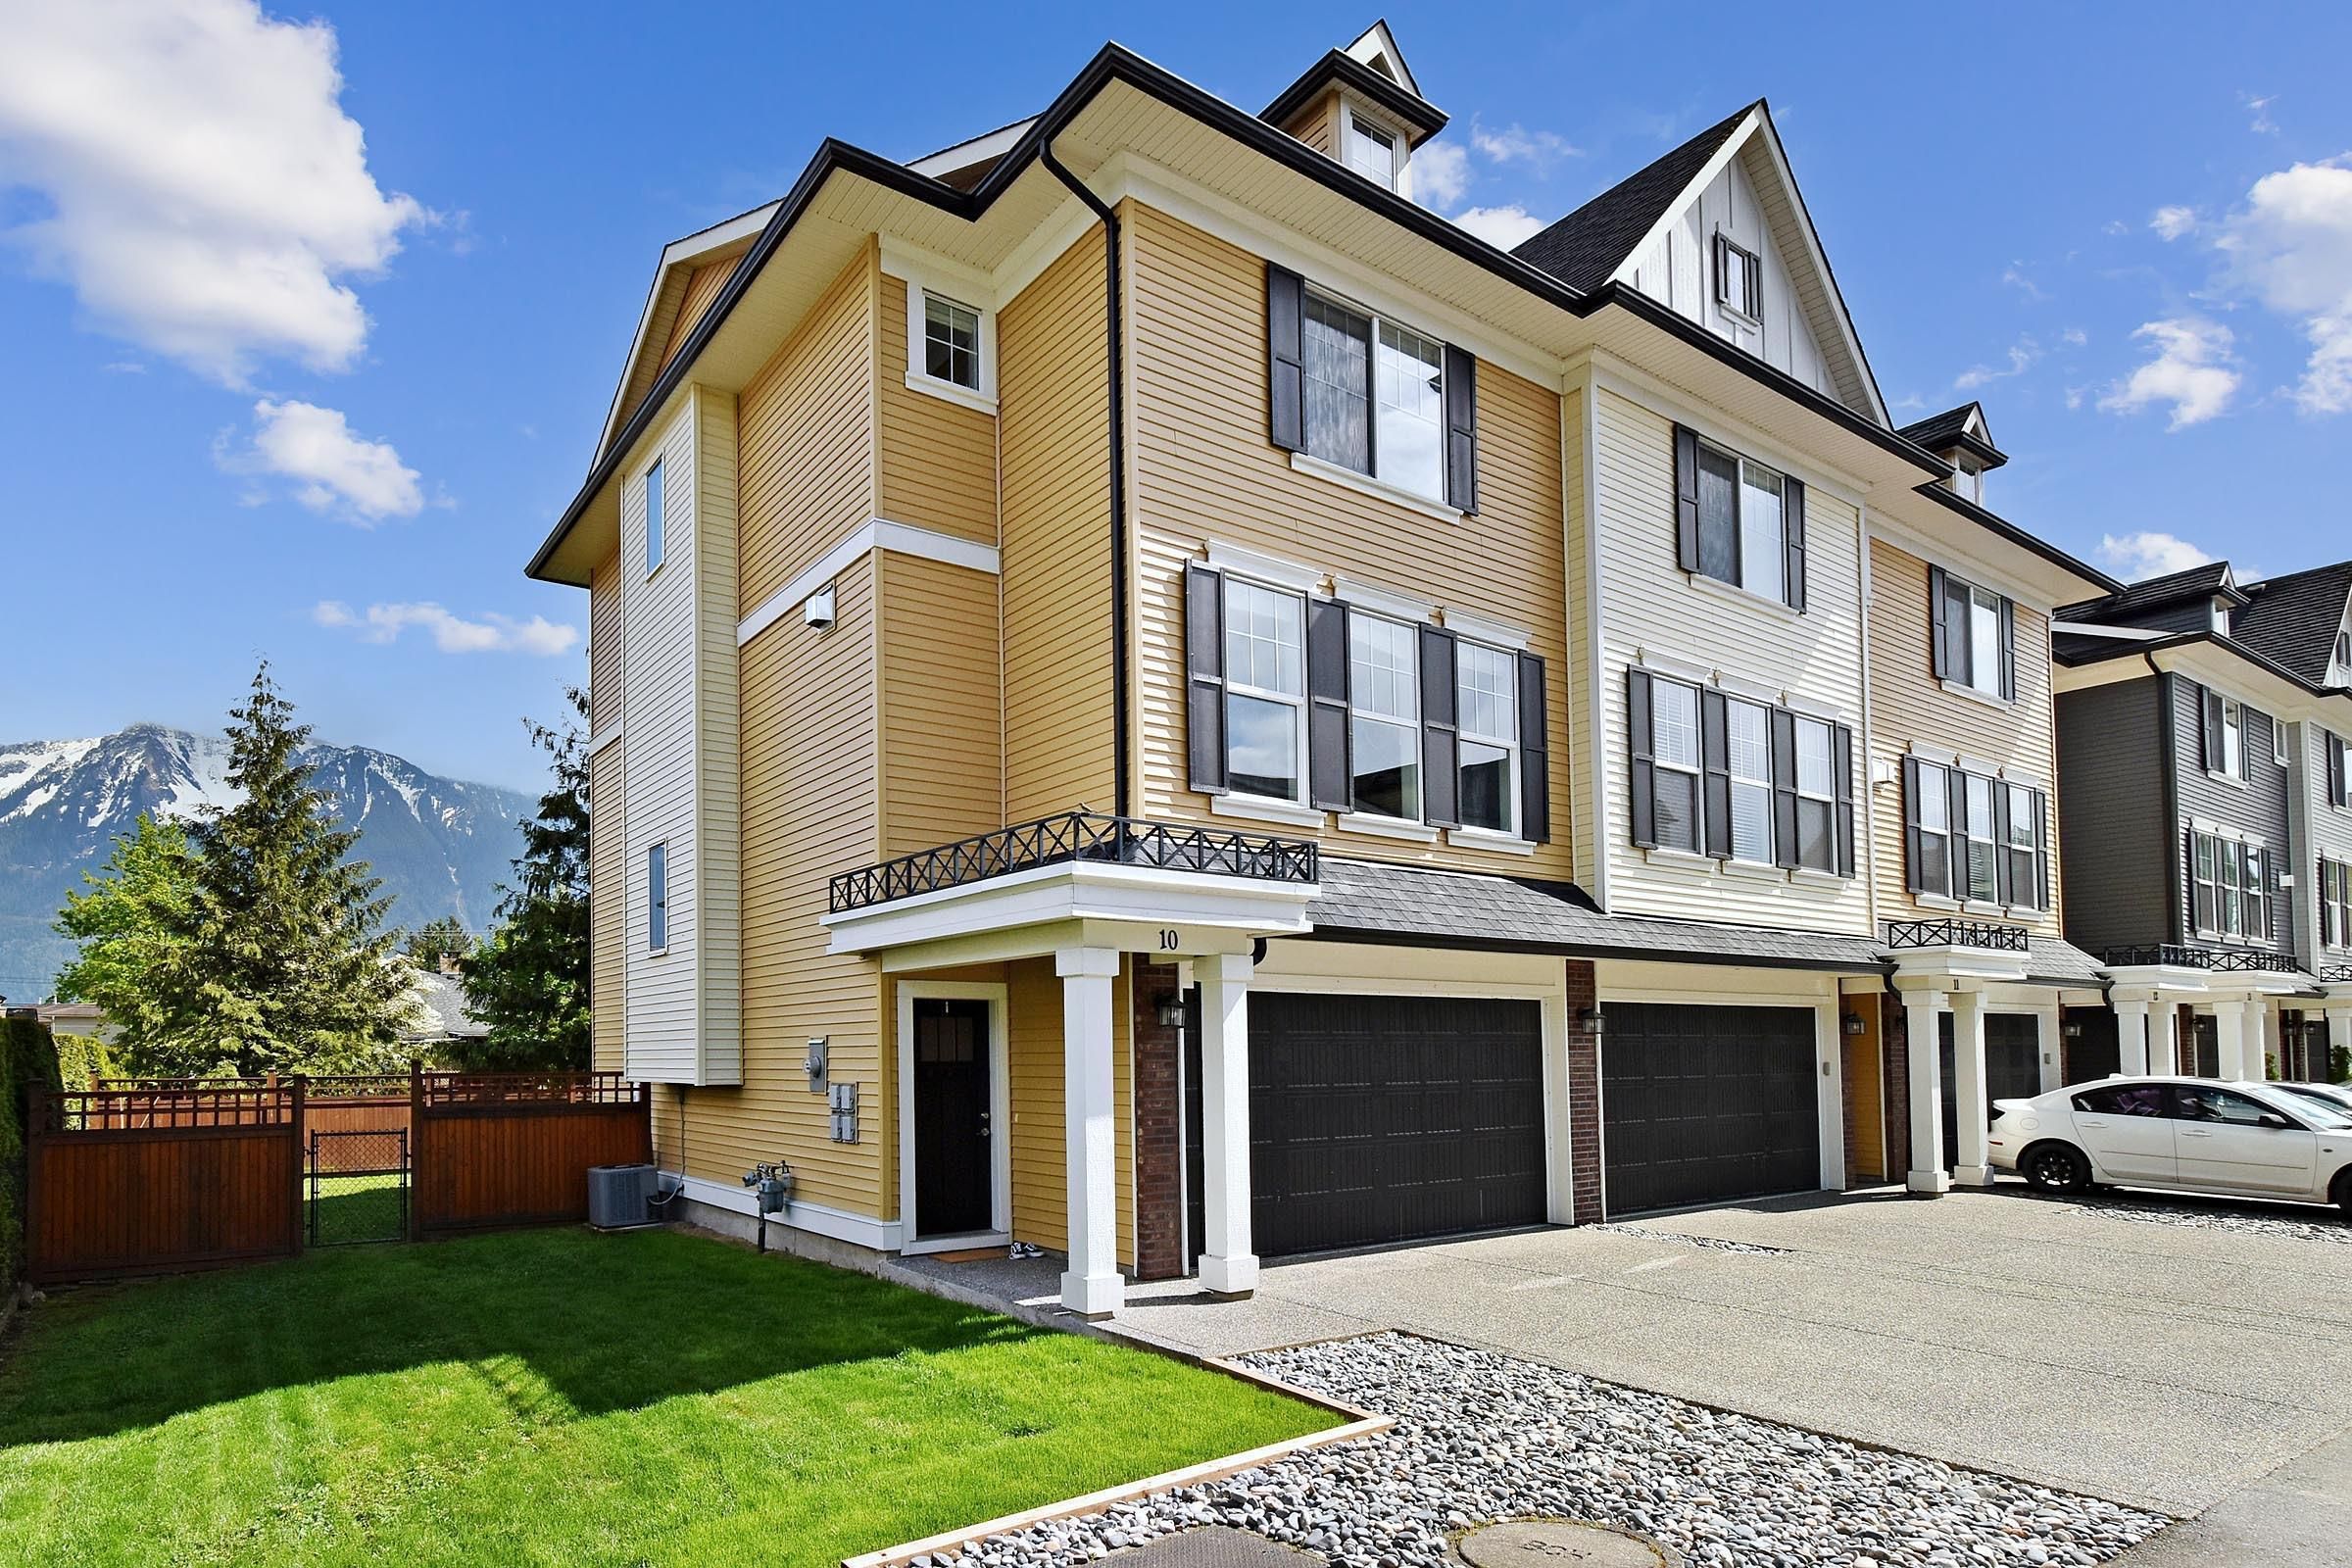 I have sold a property at 10 1640 MACKAY CRES in Agassiz
